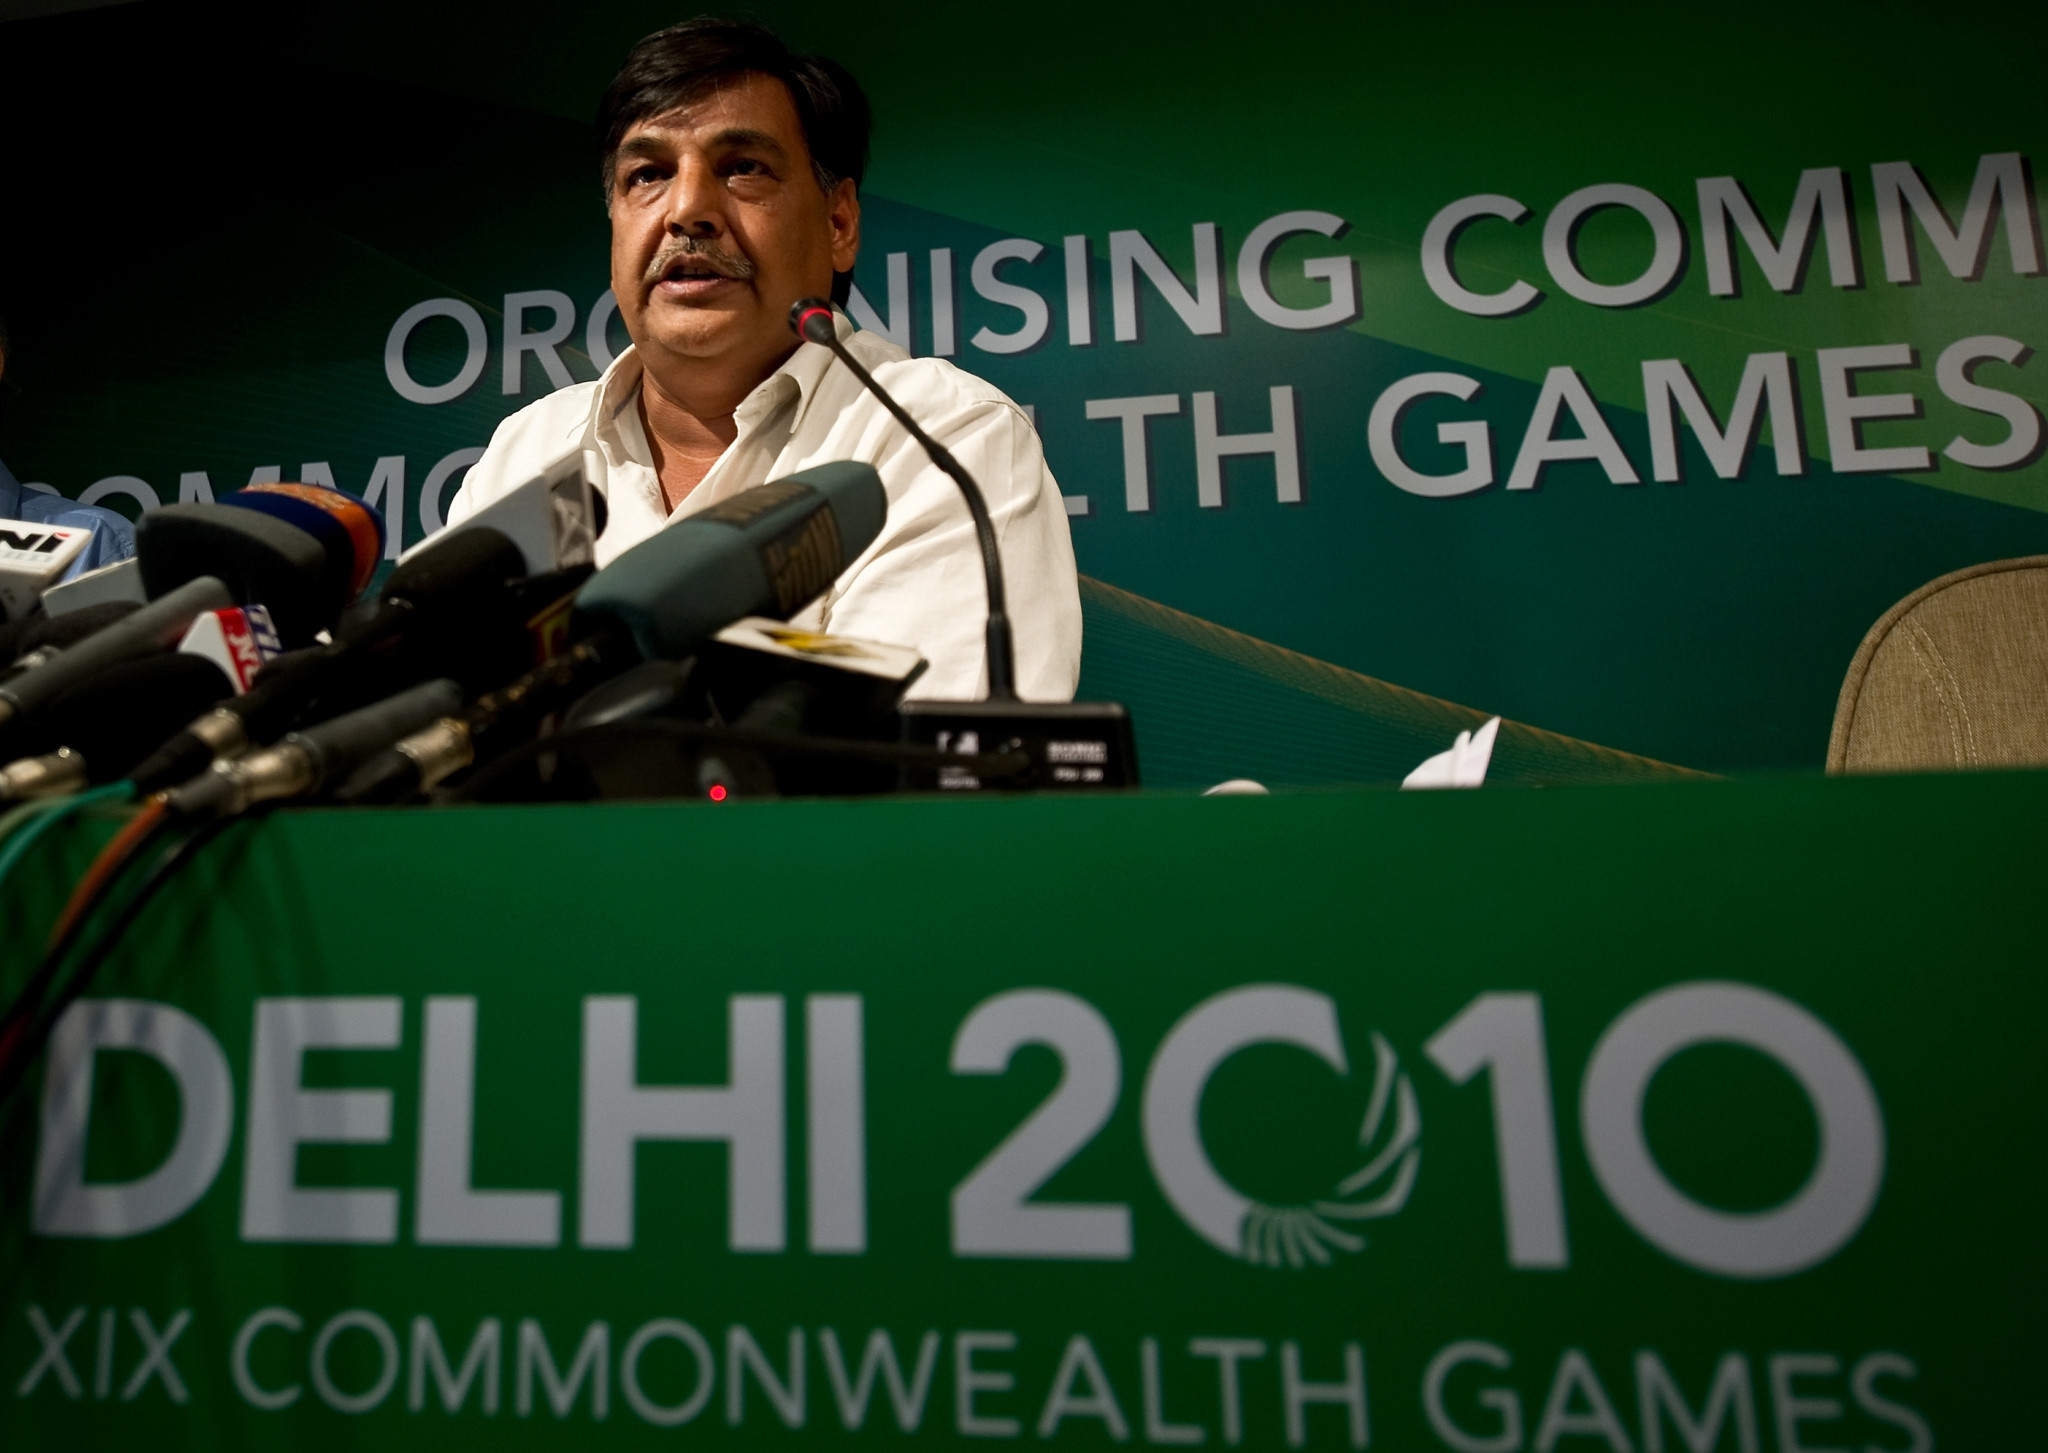 Former Delhi 2010 secretary general Lalit Bhanot reportedly faces further charges related to the Games ©Getty Images